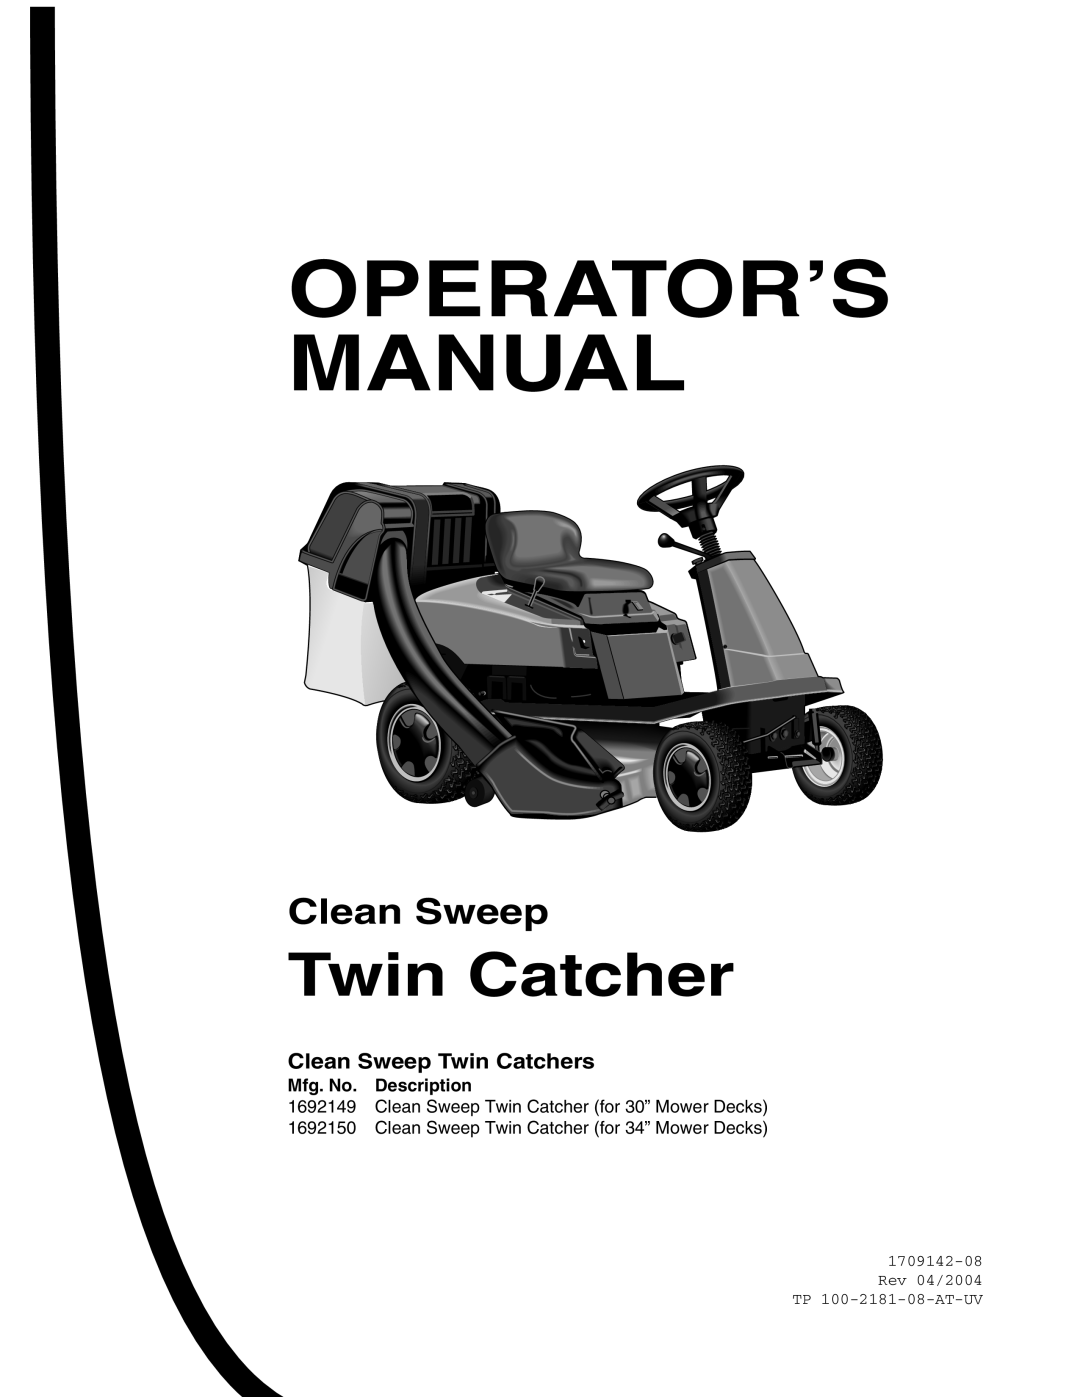 Simplicity 1692150, 1692149 instruction sheet Clean Sweep Twin Catchers, Operator’S Manual, Rev 04/2004 TP 100-2181-08-AT-UV 